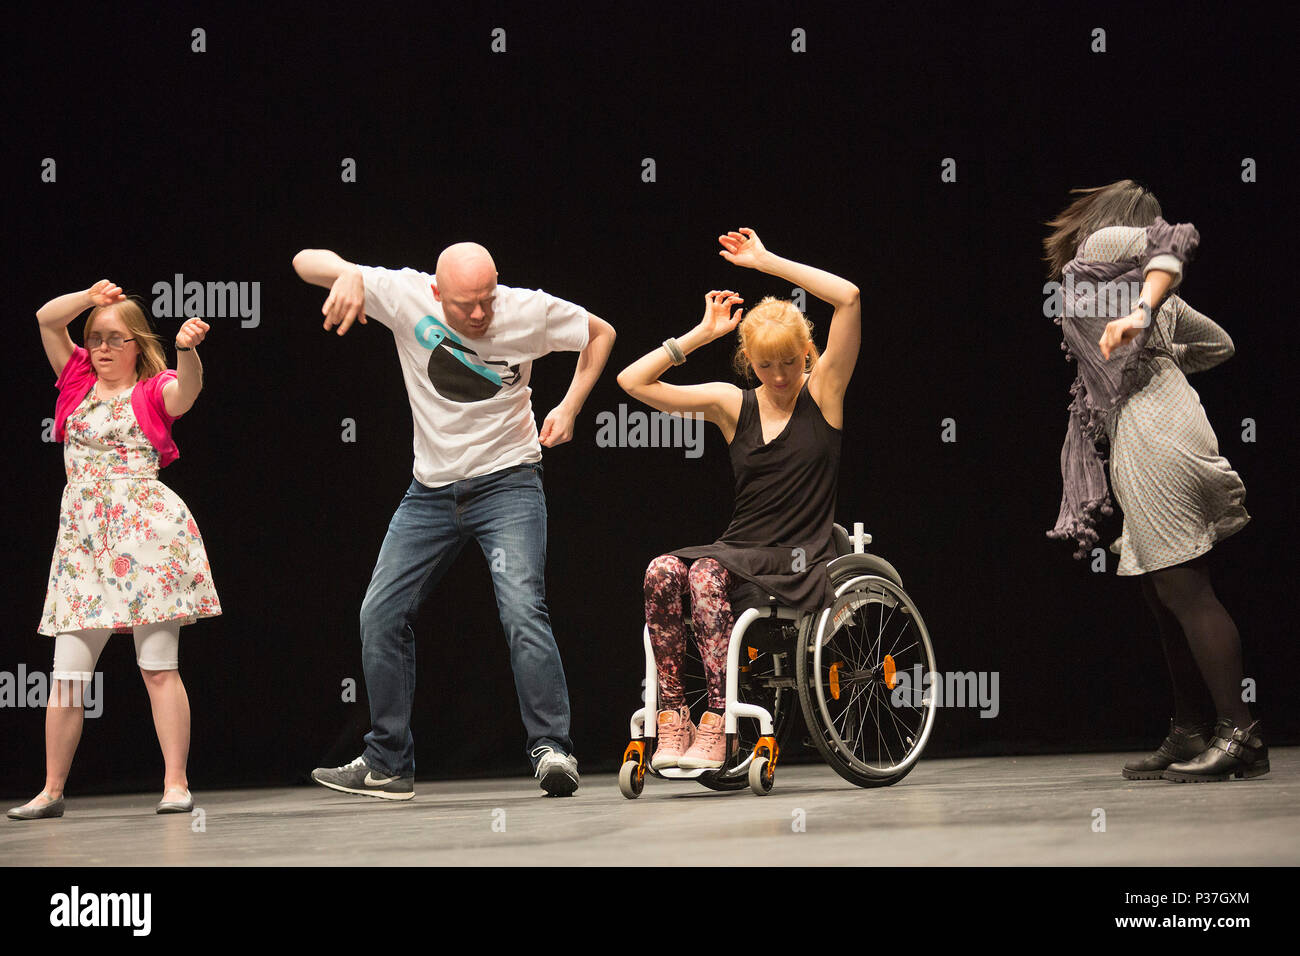 London, UK. 20 March 2015.  L-R: Katy Francis, Gary Clarke. Suzie Birchwood and Jia-Yu Corti. Sadler's Wells presents a weekend of inclusive dance from 20 to 22 March 2015. Candoco Dance Company, a contemporary dance comapny of disabled and non-disabled performers presents a restaging of Jerome Bel's award-winning The Show Must Go On. The weekend also includes the final performances of the inaugural year of the Sadler's Wells =dance series, a presentation of inclusive dance by both established and emerging deaf and disabled artists in the Lilian Baylis Studio. Stock Photo